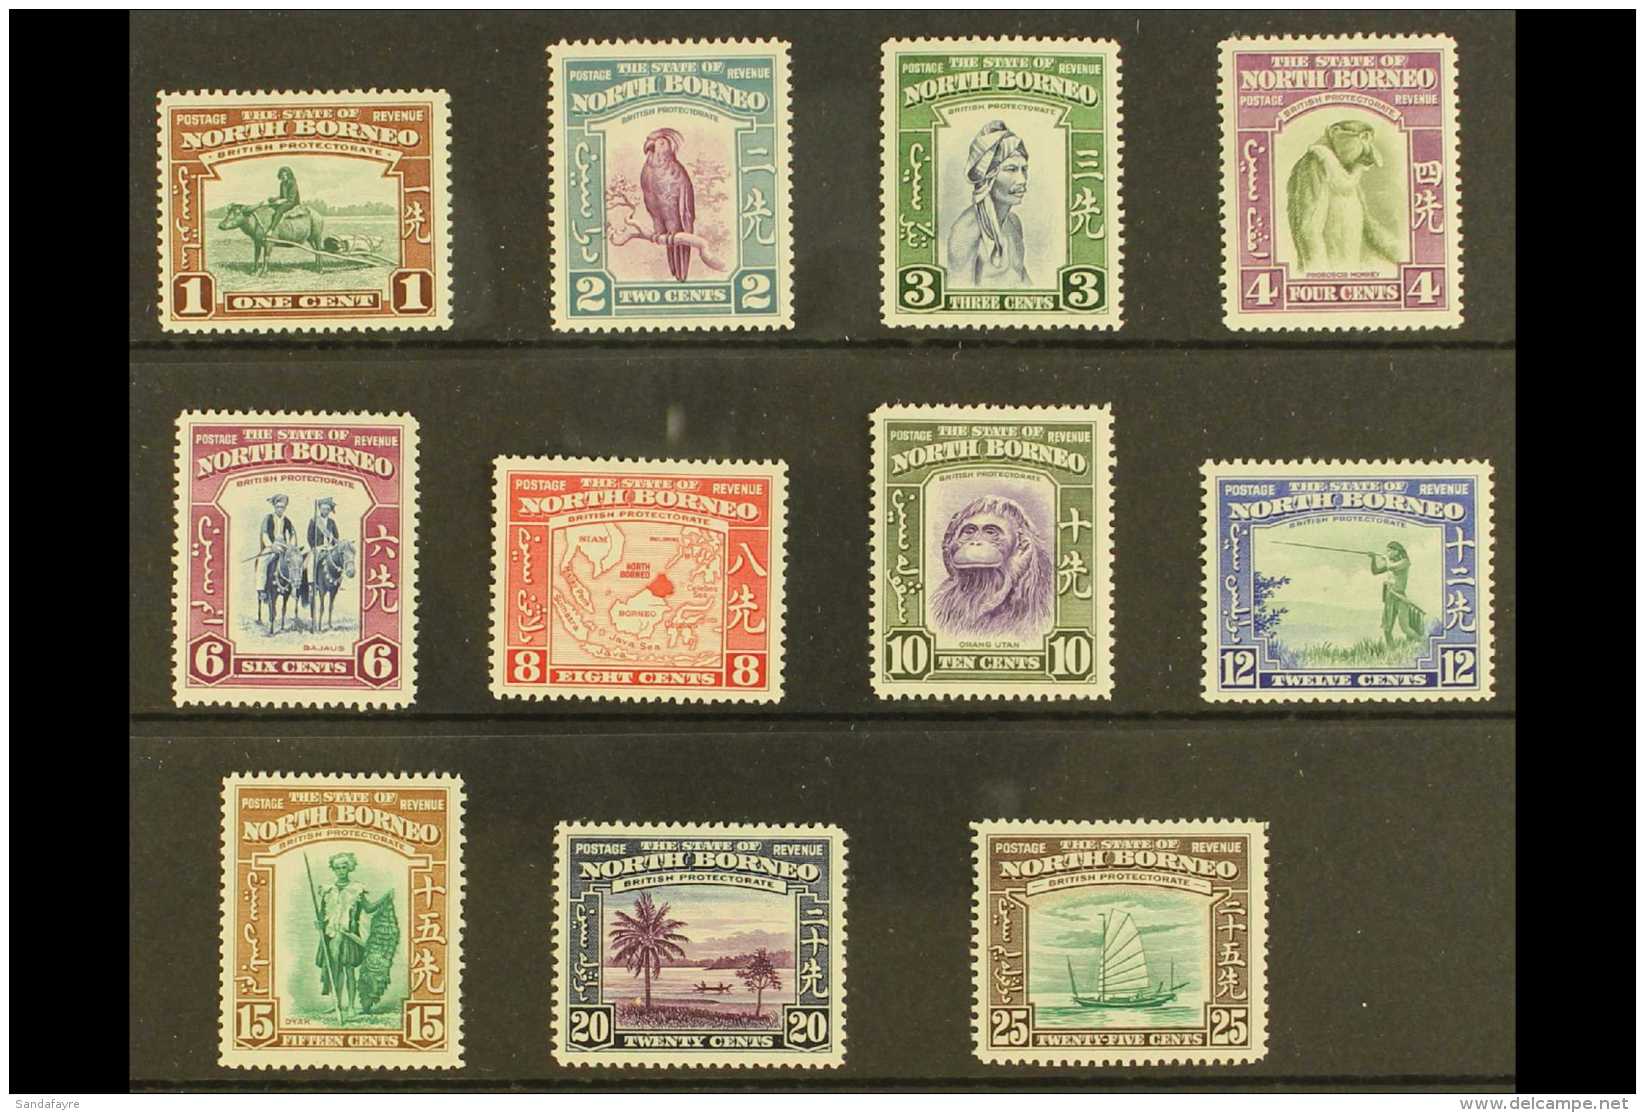 1939  Pictorial Definitives Set To 25c, SG 303/13, Very Fine Mint - Extremely Lightly Hinged, Most Values Appear... - Nordborneo (...-1963)